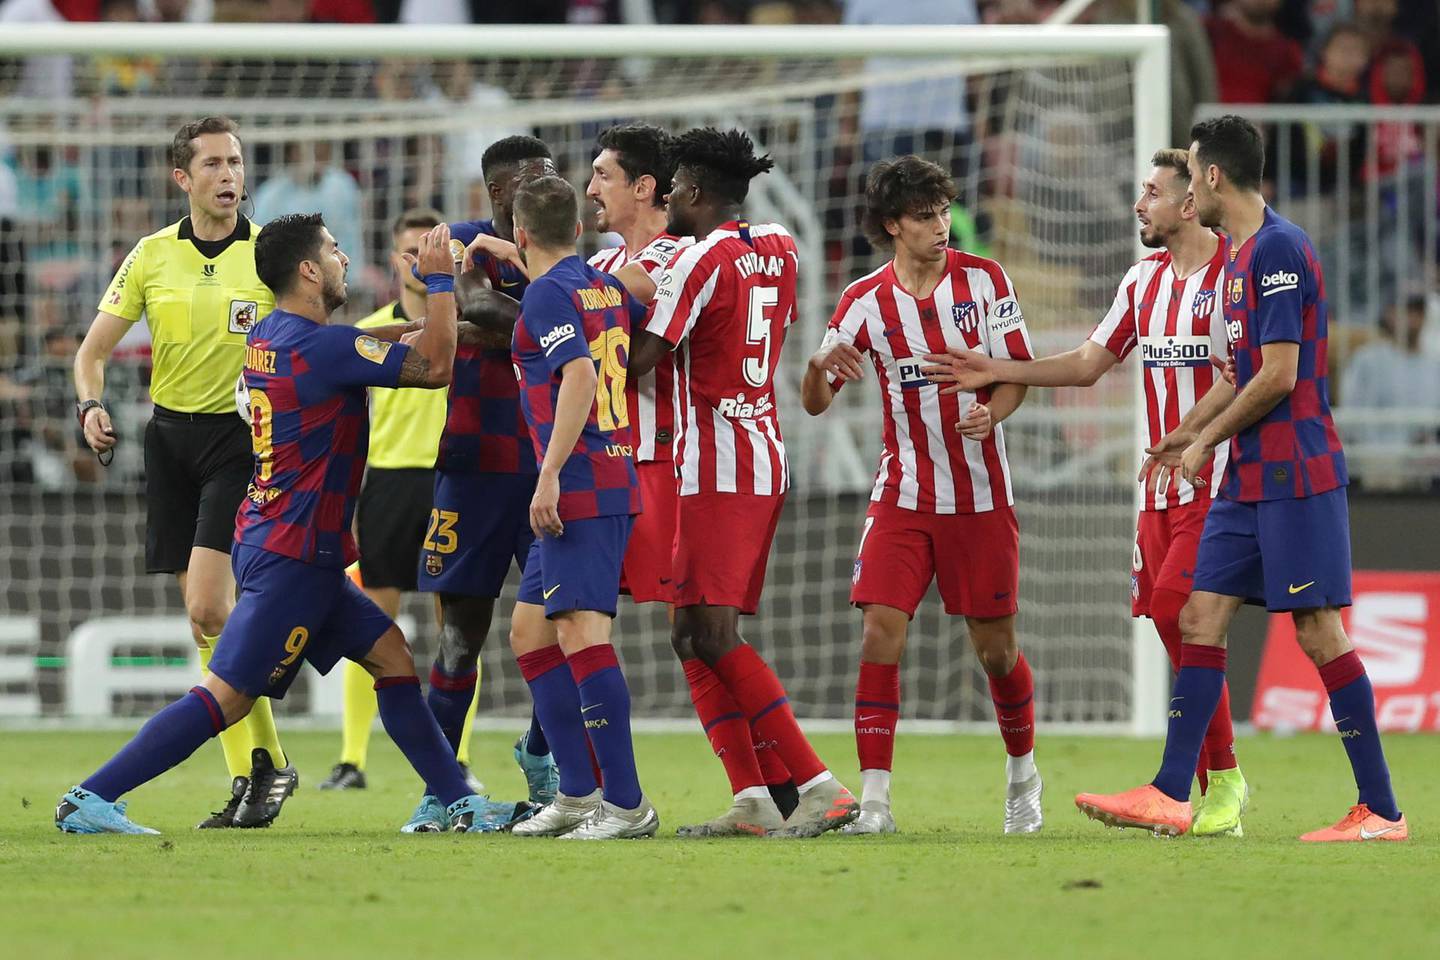 Barcelona's Luis Suarez, left, fights with Atletico Madrid's Stefan Savic, center, during the Spanish Super Cup semifinal soccer match between Barcelona and Atletico Madrid at King Abdullah stadium in Jiddah, Saudi Arabia, Thursday, Jan. 9, 2020. (AP Photo/Hassan Ammar)